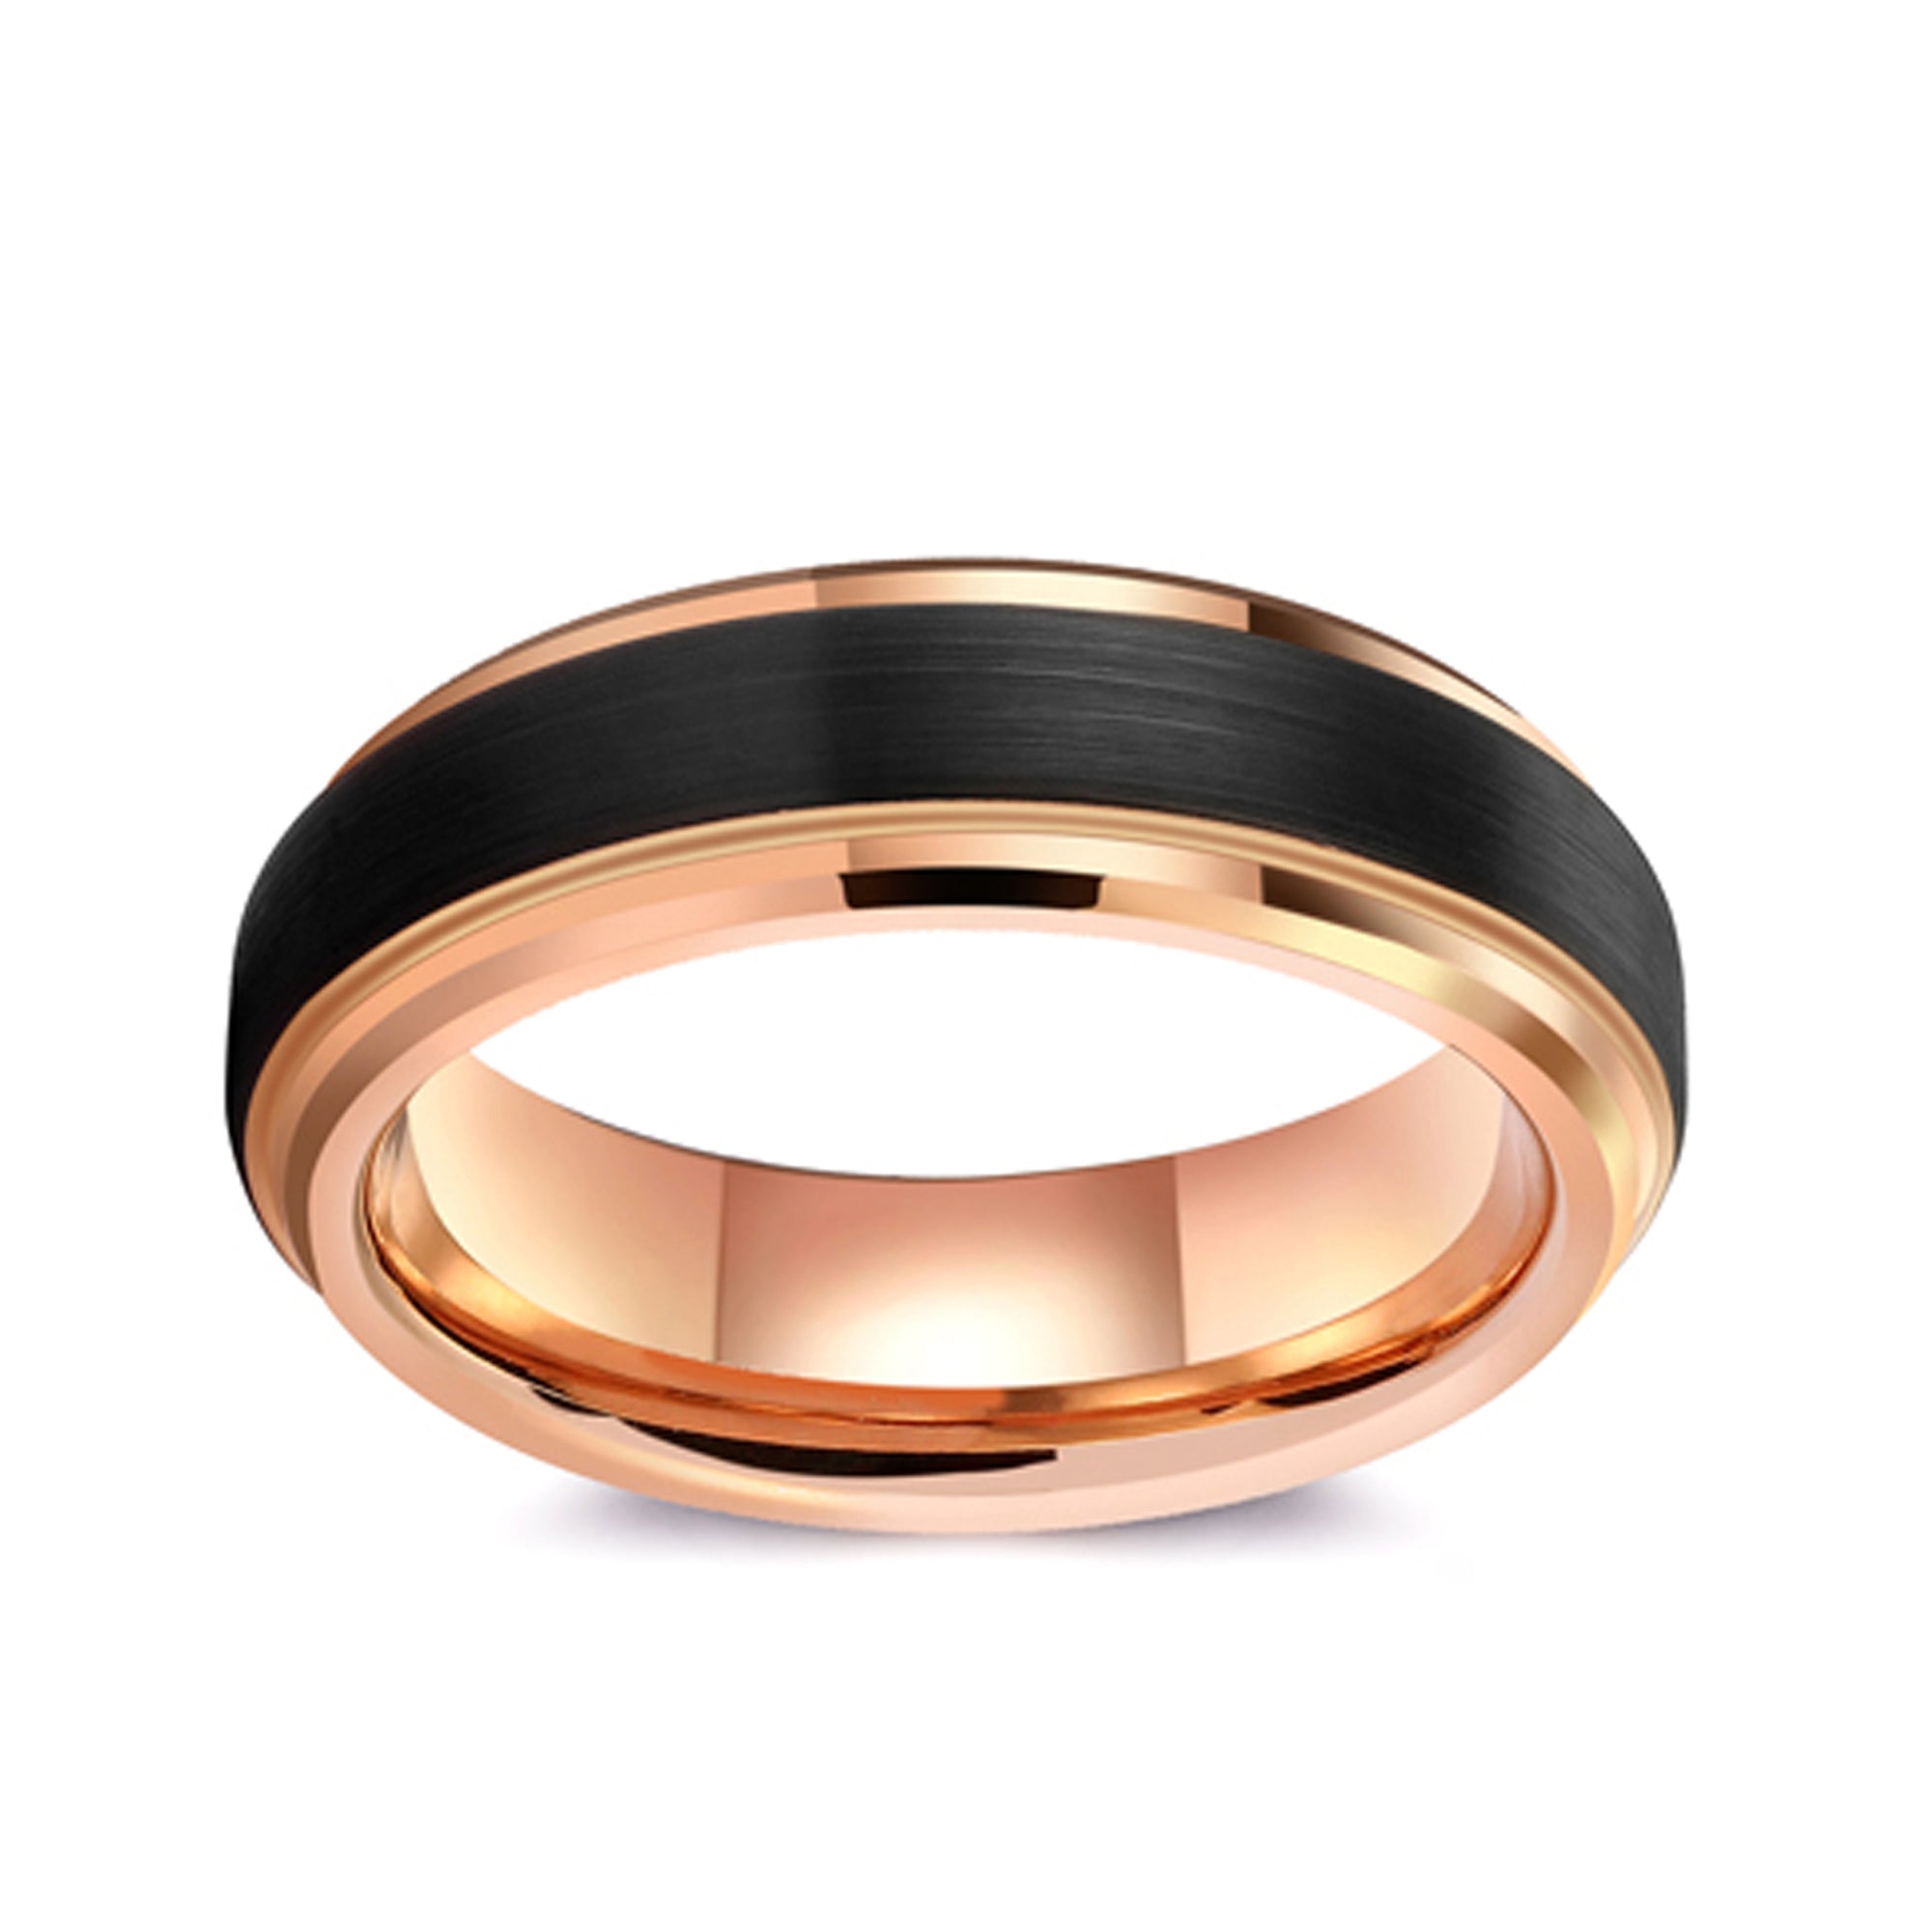 Tungsten Carbide Ring with Stepped Edge in Black and Rose Gold, 6MM